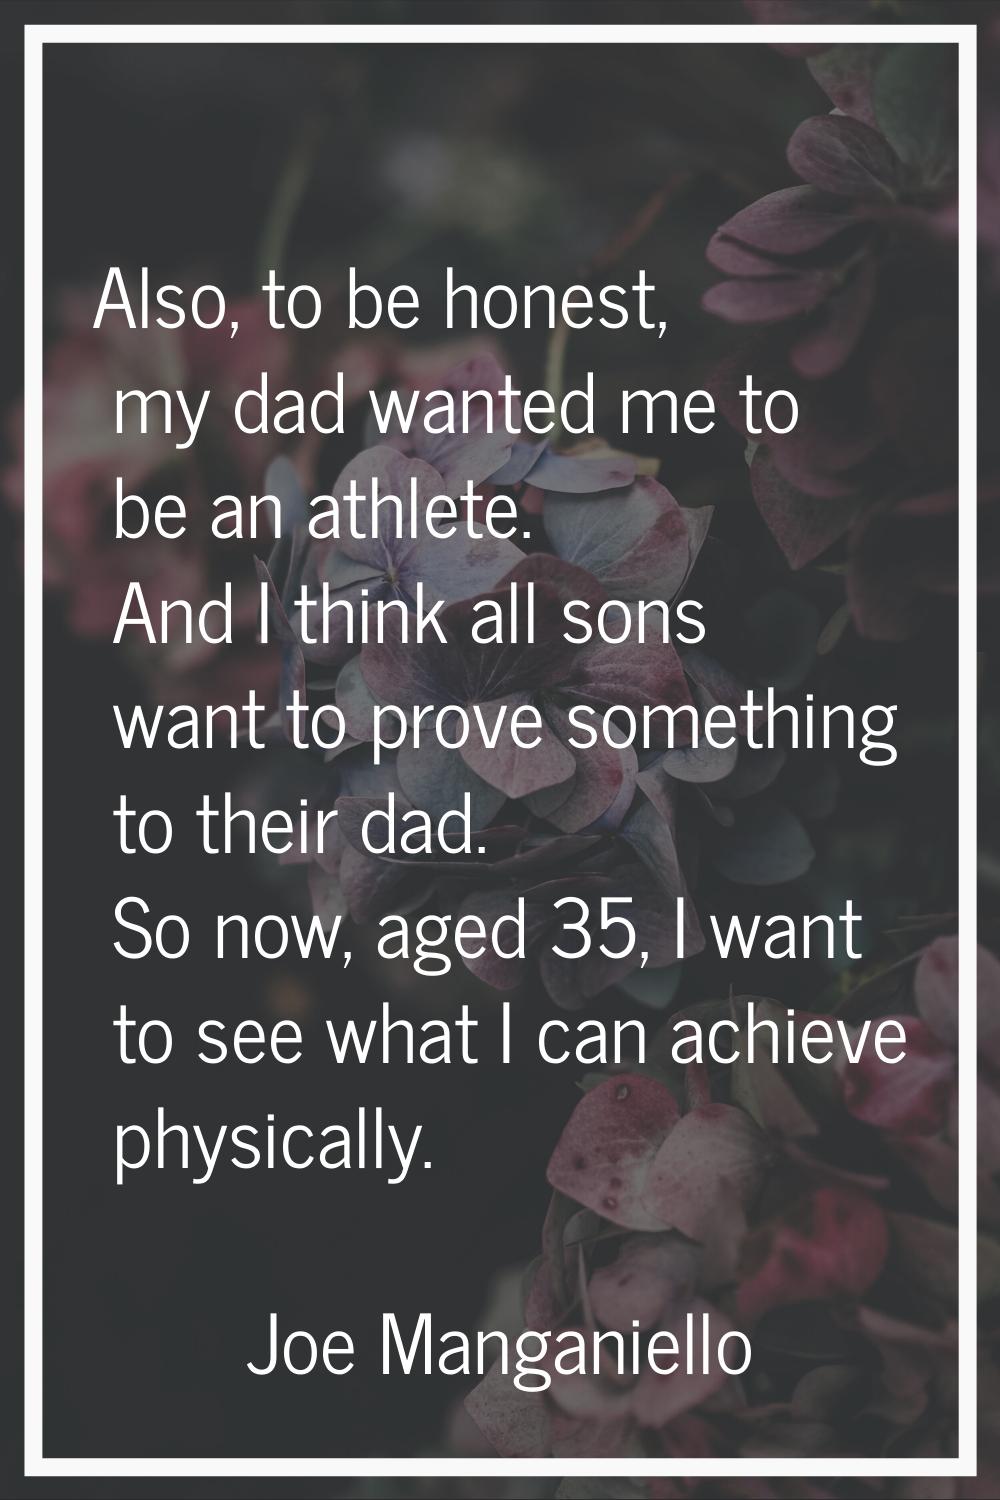 Also, to be honest, my dad wanted me to be an athlete. And I think all sons want to prove something